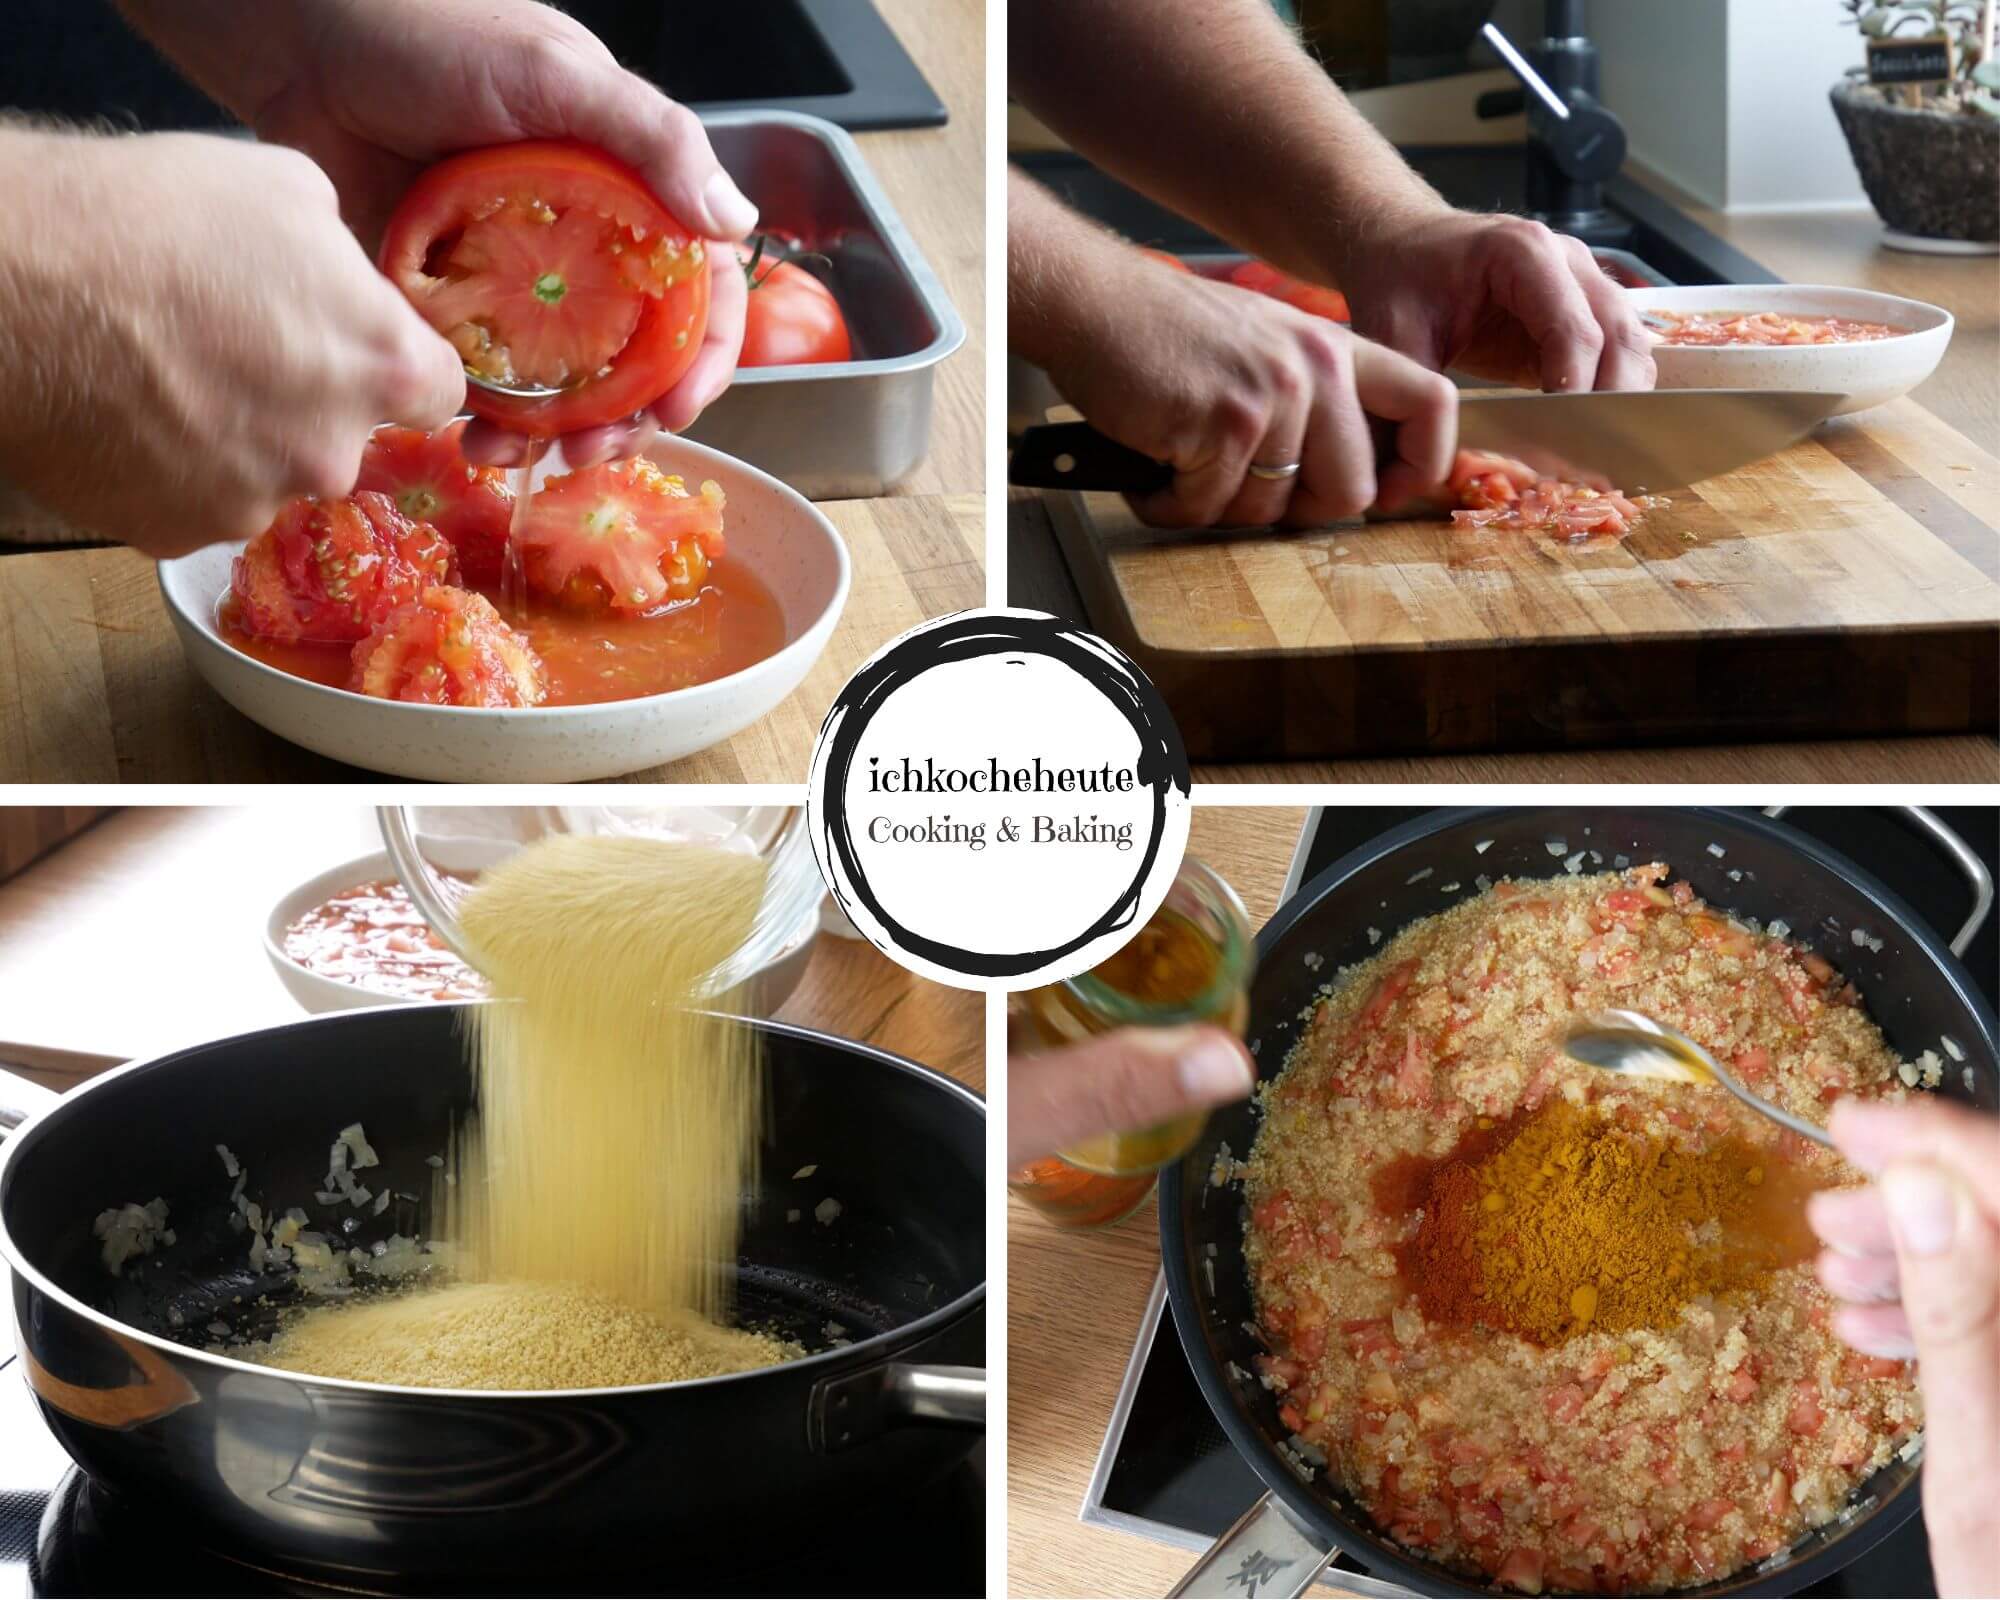 Preparations for Stuffed Tomatoes with Couscous & Feta